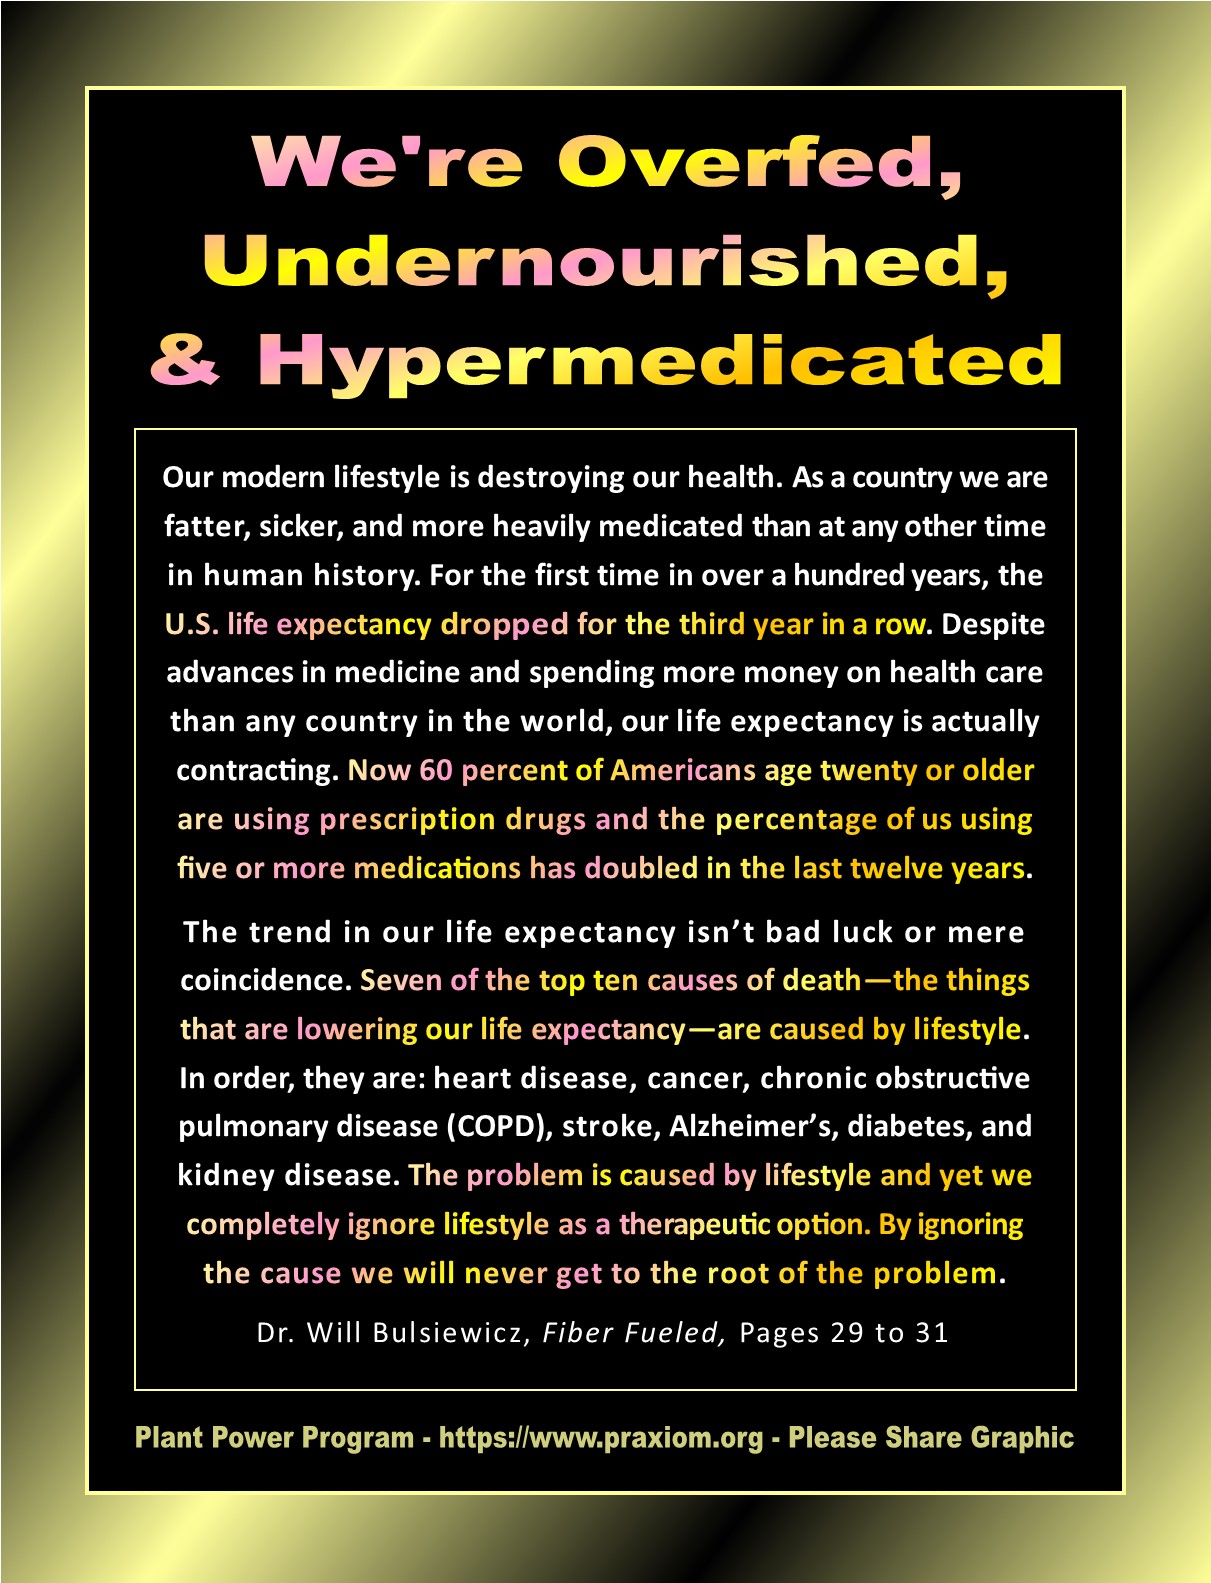 We're Overfed, Undernourished, and Hypermedicated - Dr. Will Bulsiewicz